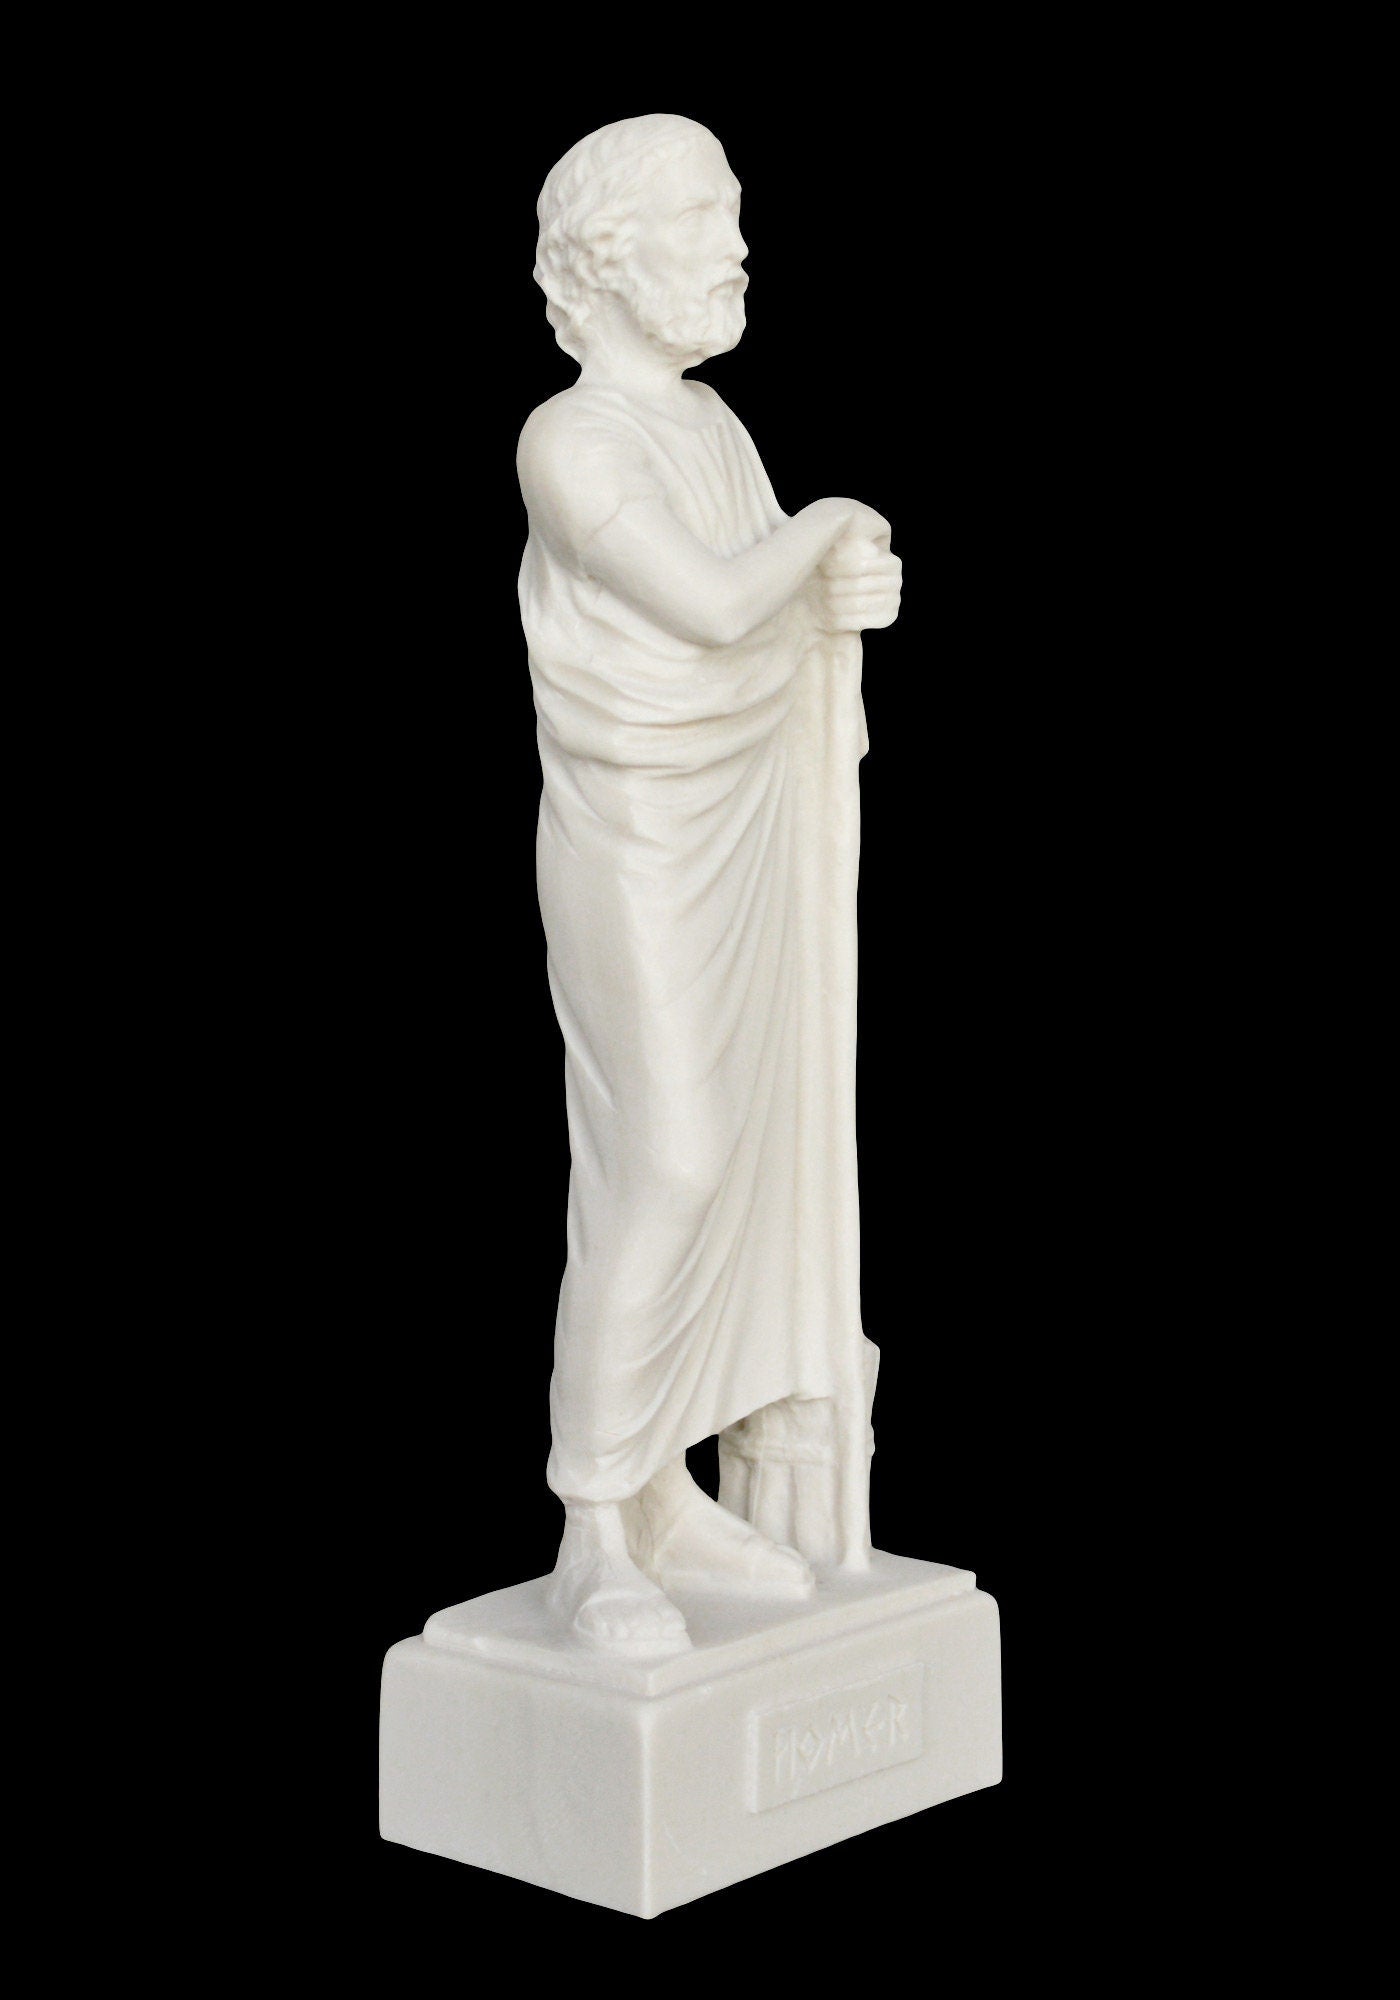 Homer - Ancient Greek Poet - Iliad and Odyssey - Most Influential Author in the Western World - Alabaster Statue